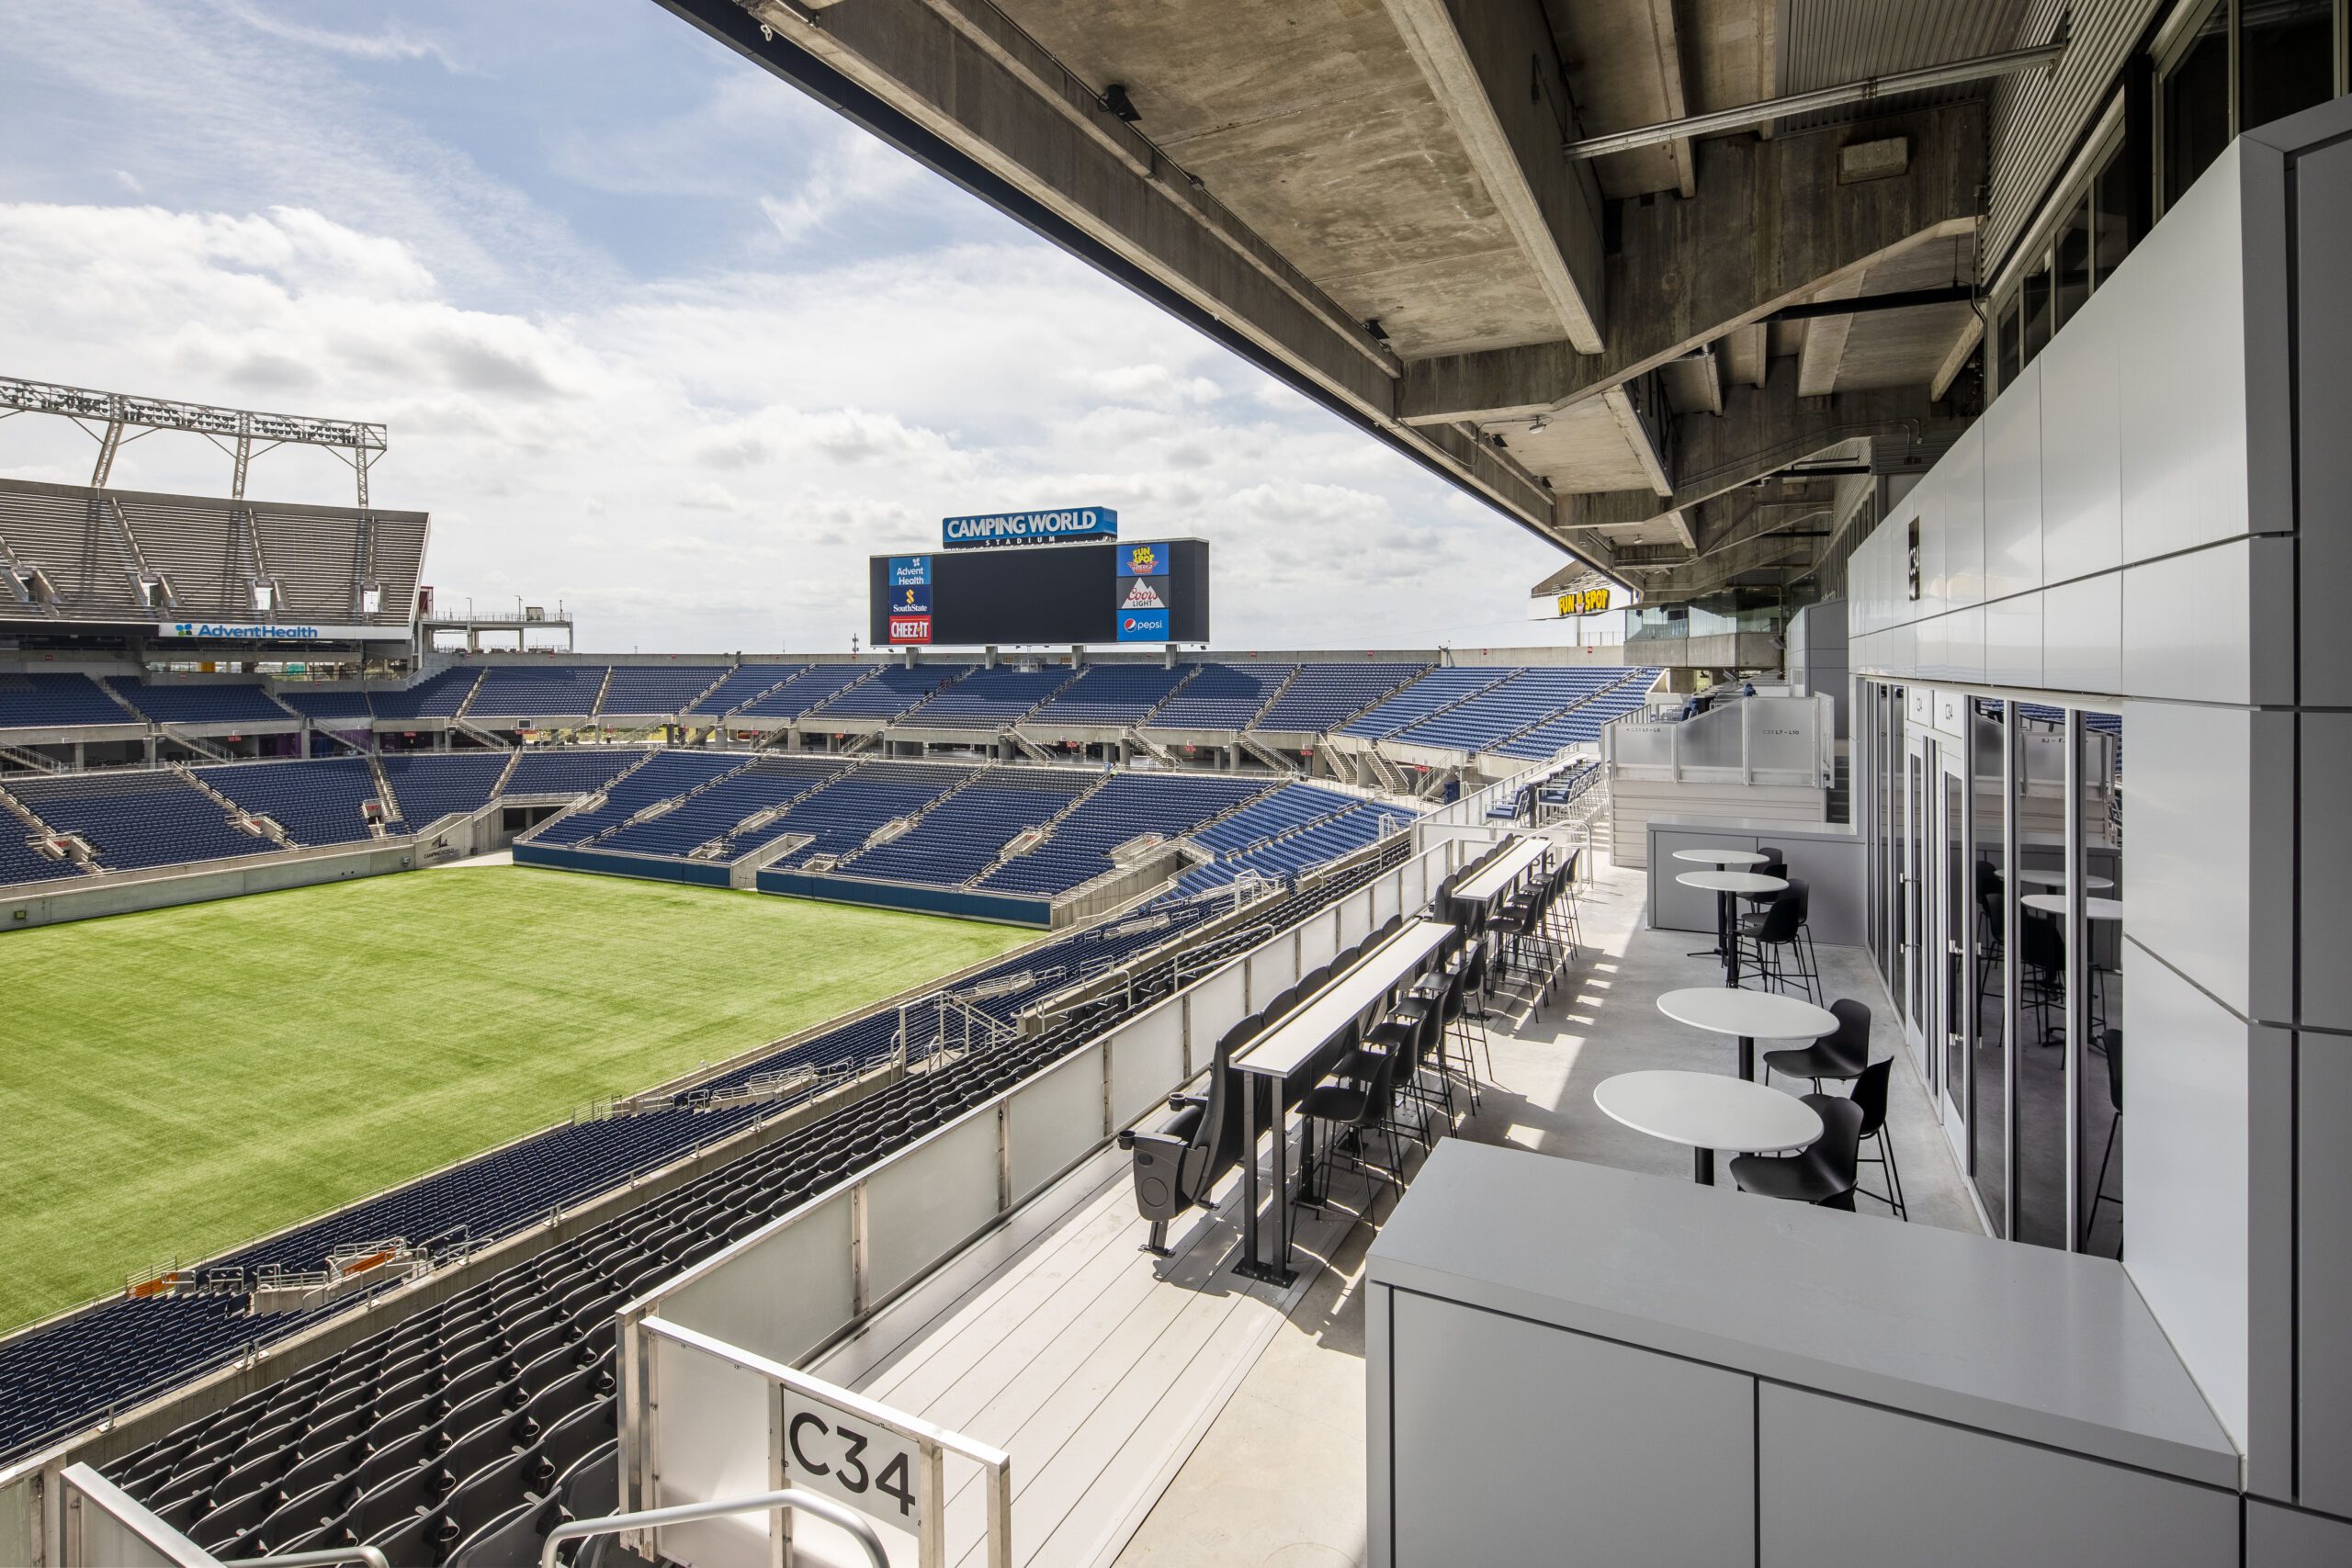 Expansive view of newly renovated Camping World Stadium featuring club seats and the lower-bowl